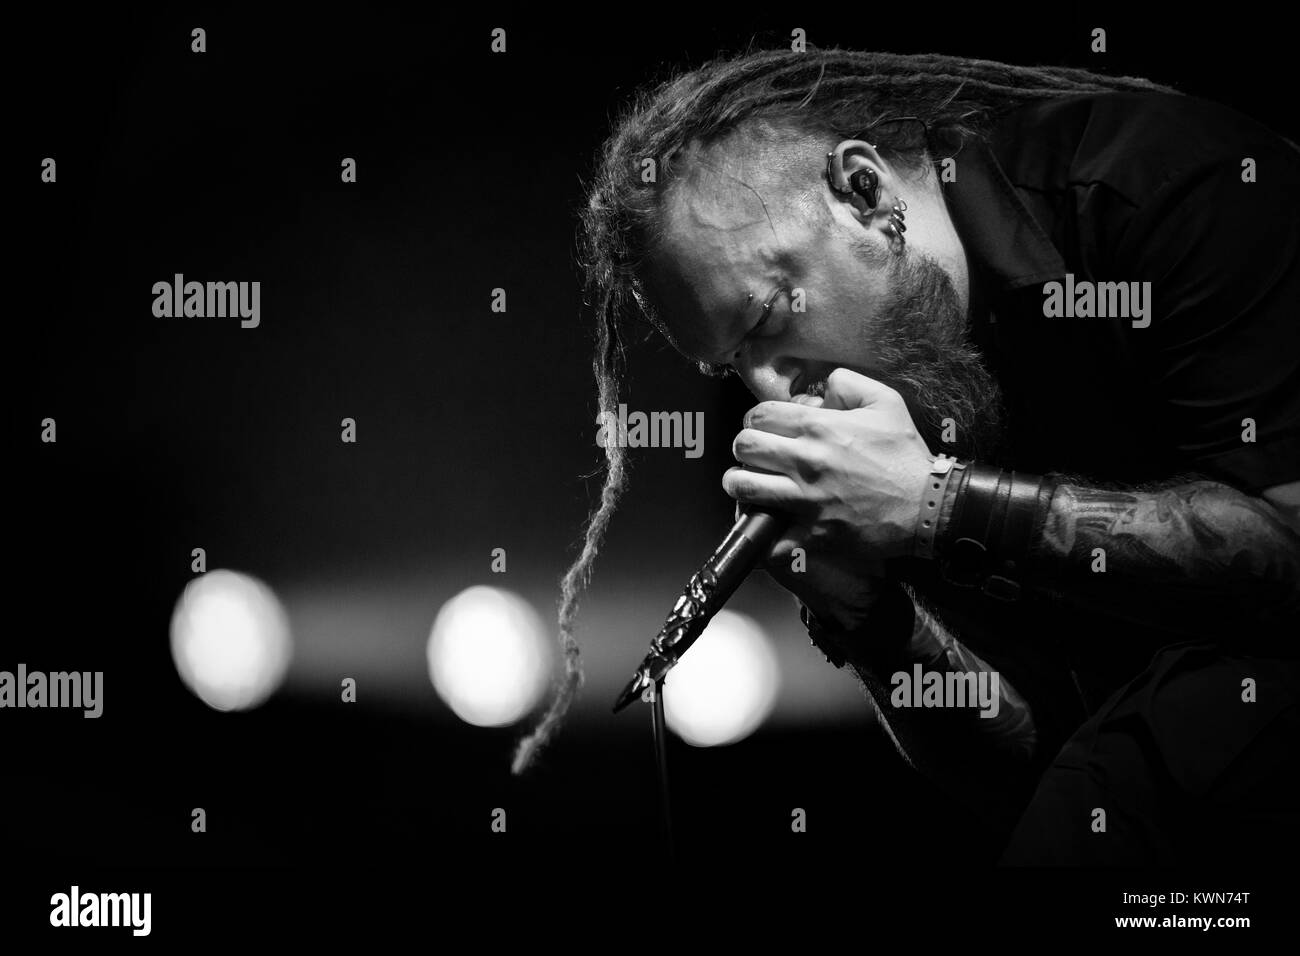 The Polish death metal band Decapitated performs a live concert at the Danish heavy metal festival Copenhell 2016 in Copenhagen. Here vocalist Rafal “Rasta” Piotrowski is seen live on stage. Denmark, 25/06 2016. Stock Photo